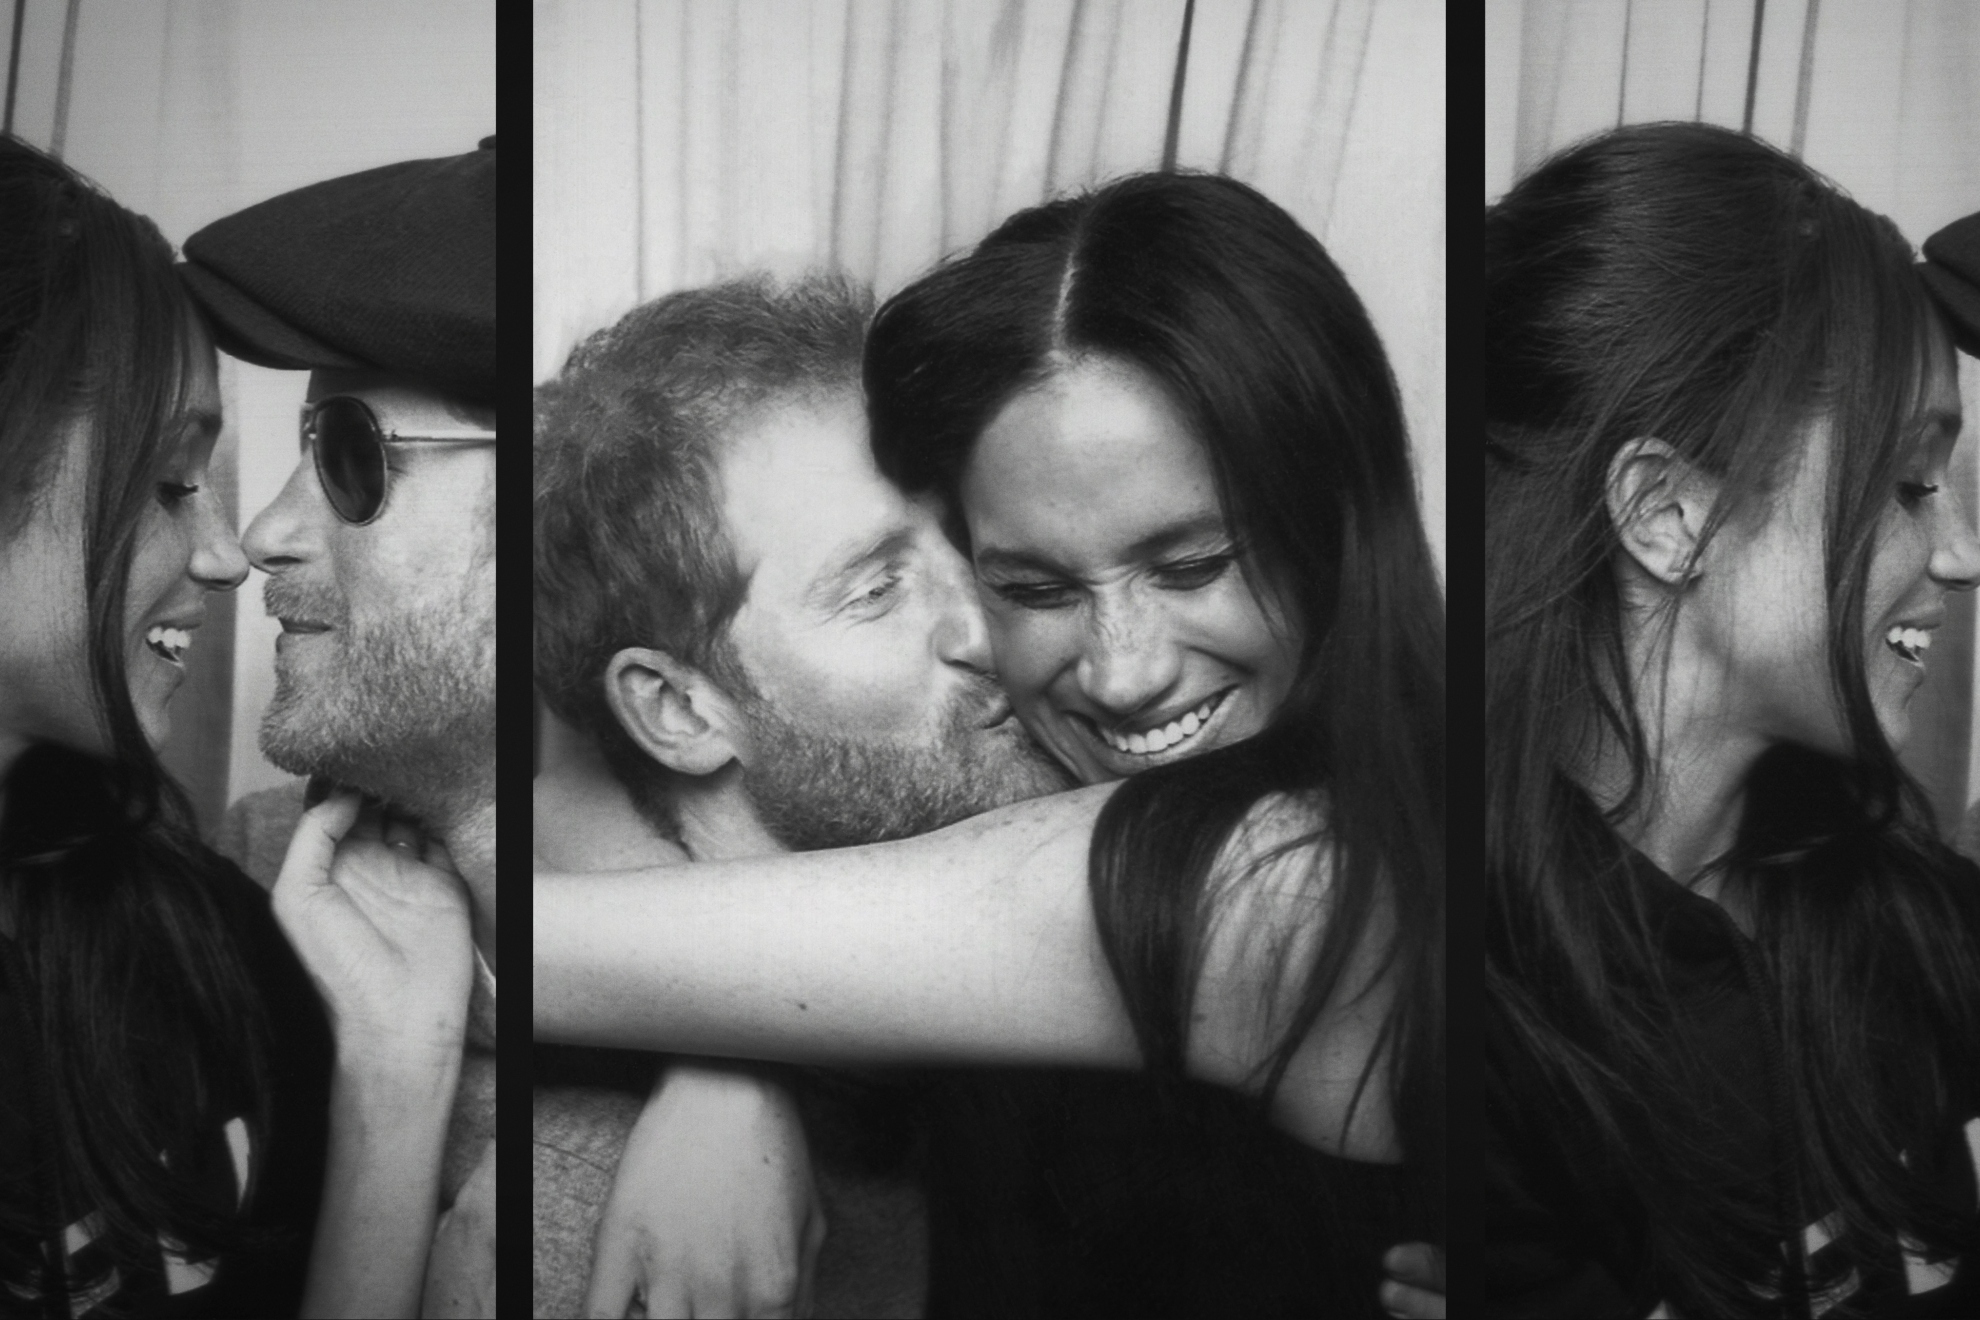 Prince Harry and Meghan, Duke and Duchess of Sussex, in a scene from the upcoming documentary "Harry & Meghan," directed by Liz Garbus.